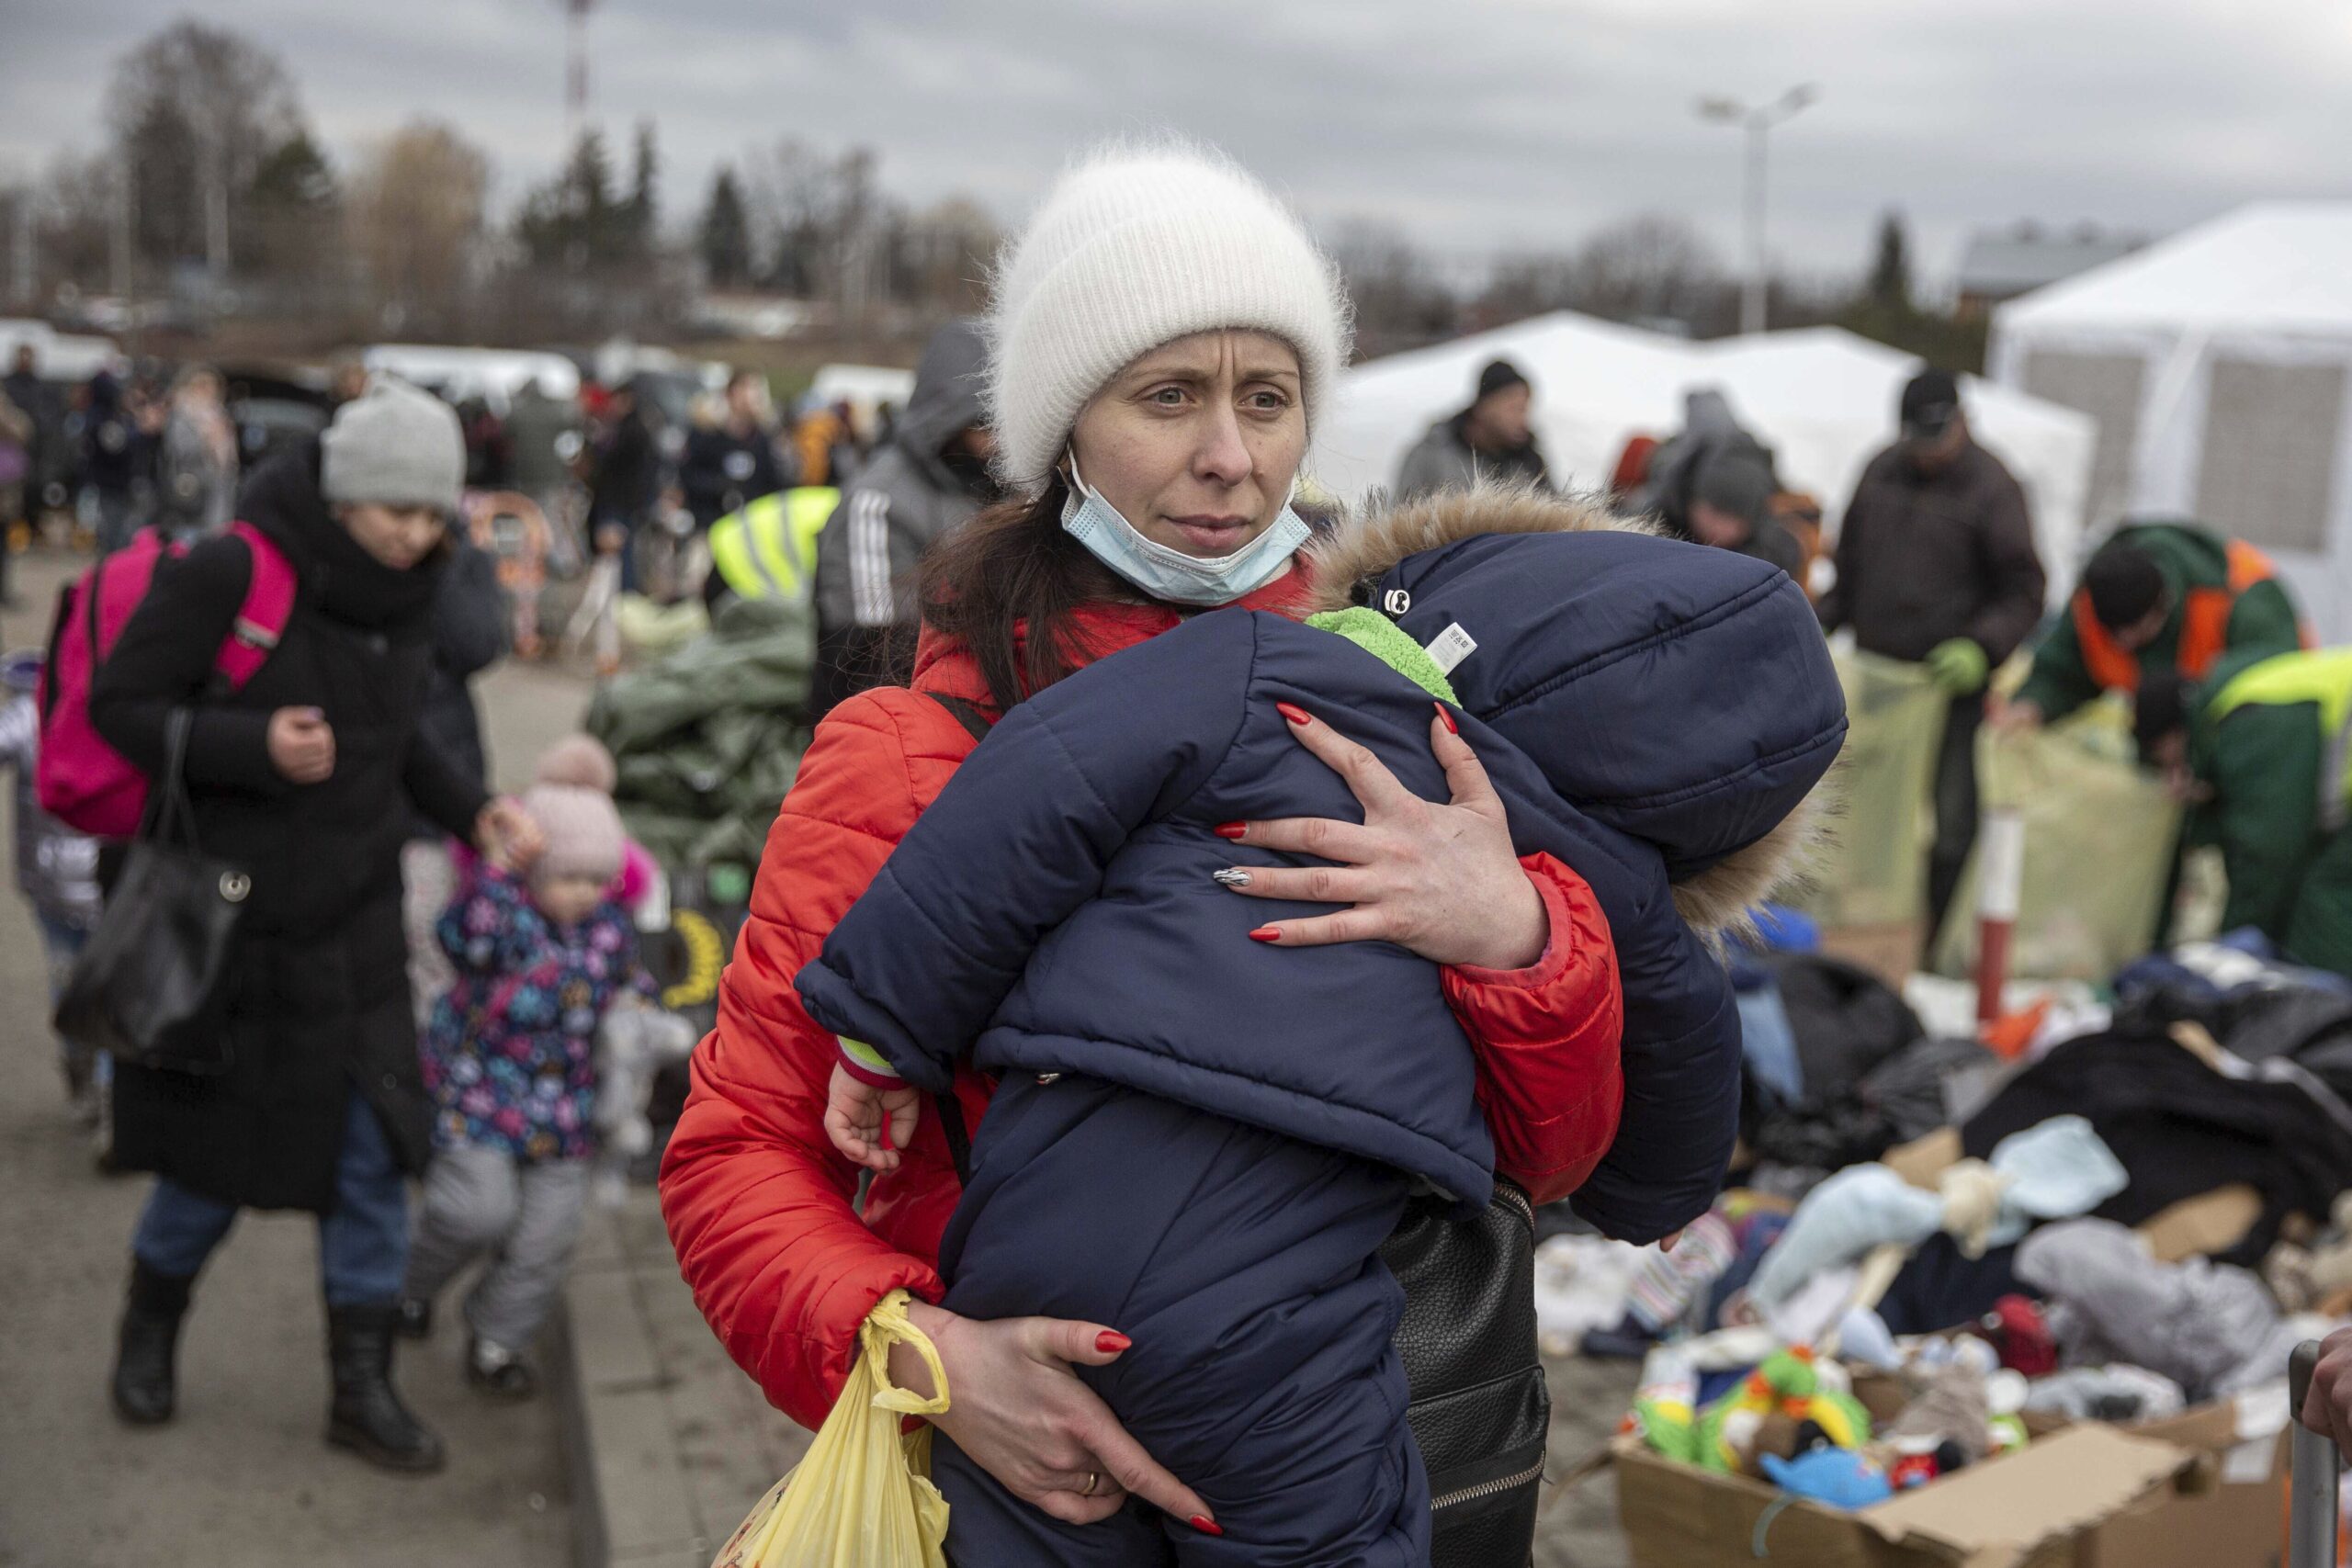 A woman carries her child as she arrives at the Medyka border crossing after fleeing from the Ukraine, in Poland, Monday, Feb. 28, 2022. The head of the United Nations refugee agency says more than a half a million people had fled Ukraine since Russia’s invasion on Thursday. (AP Photo/Visar Kryeziu)